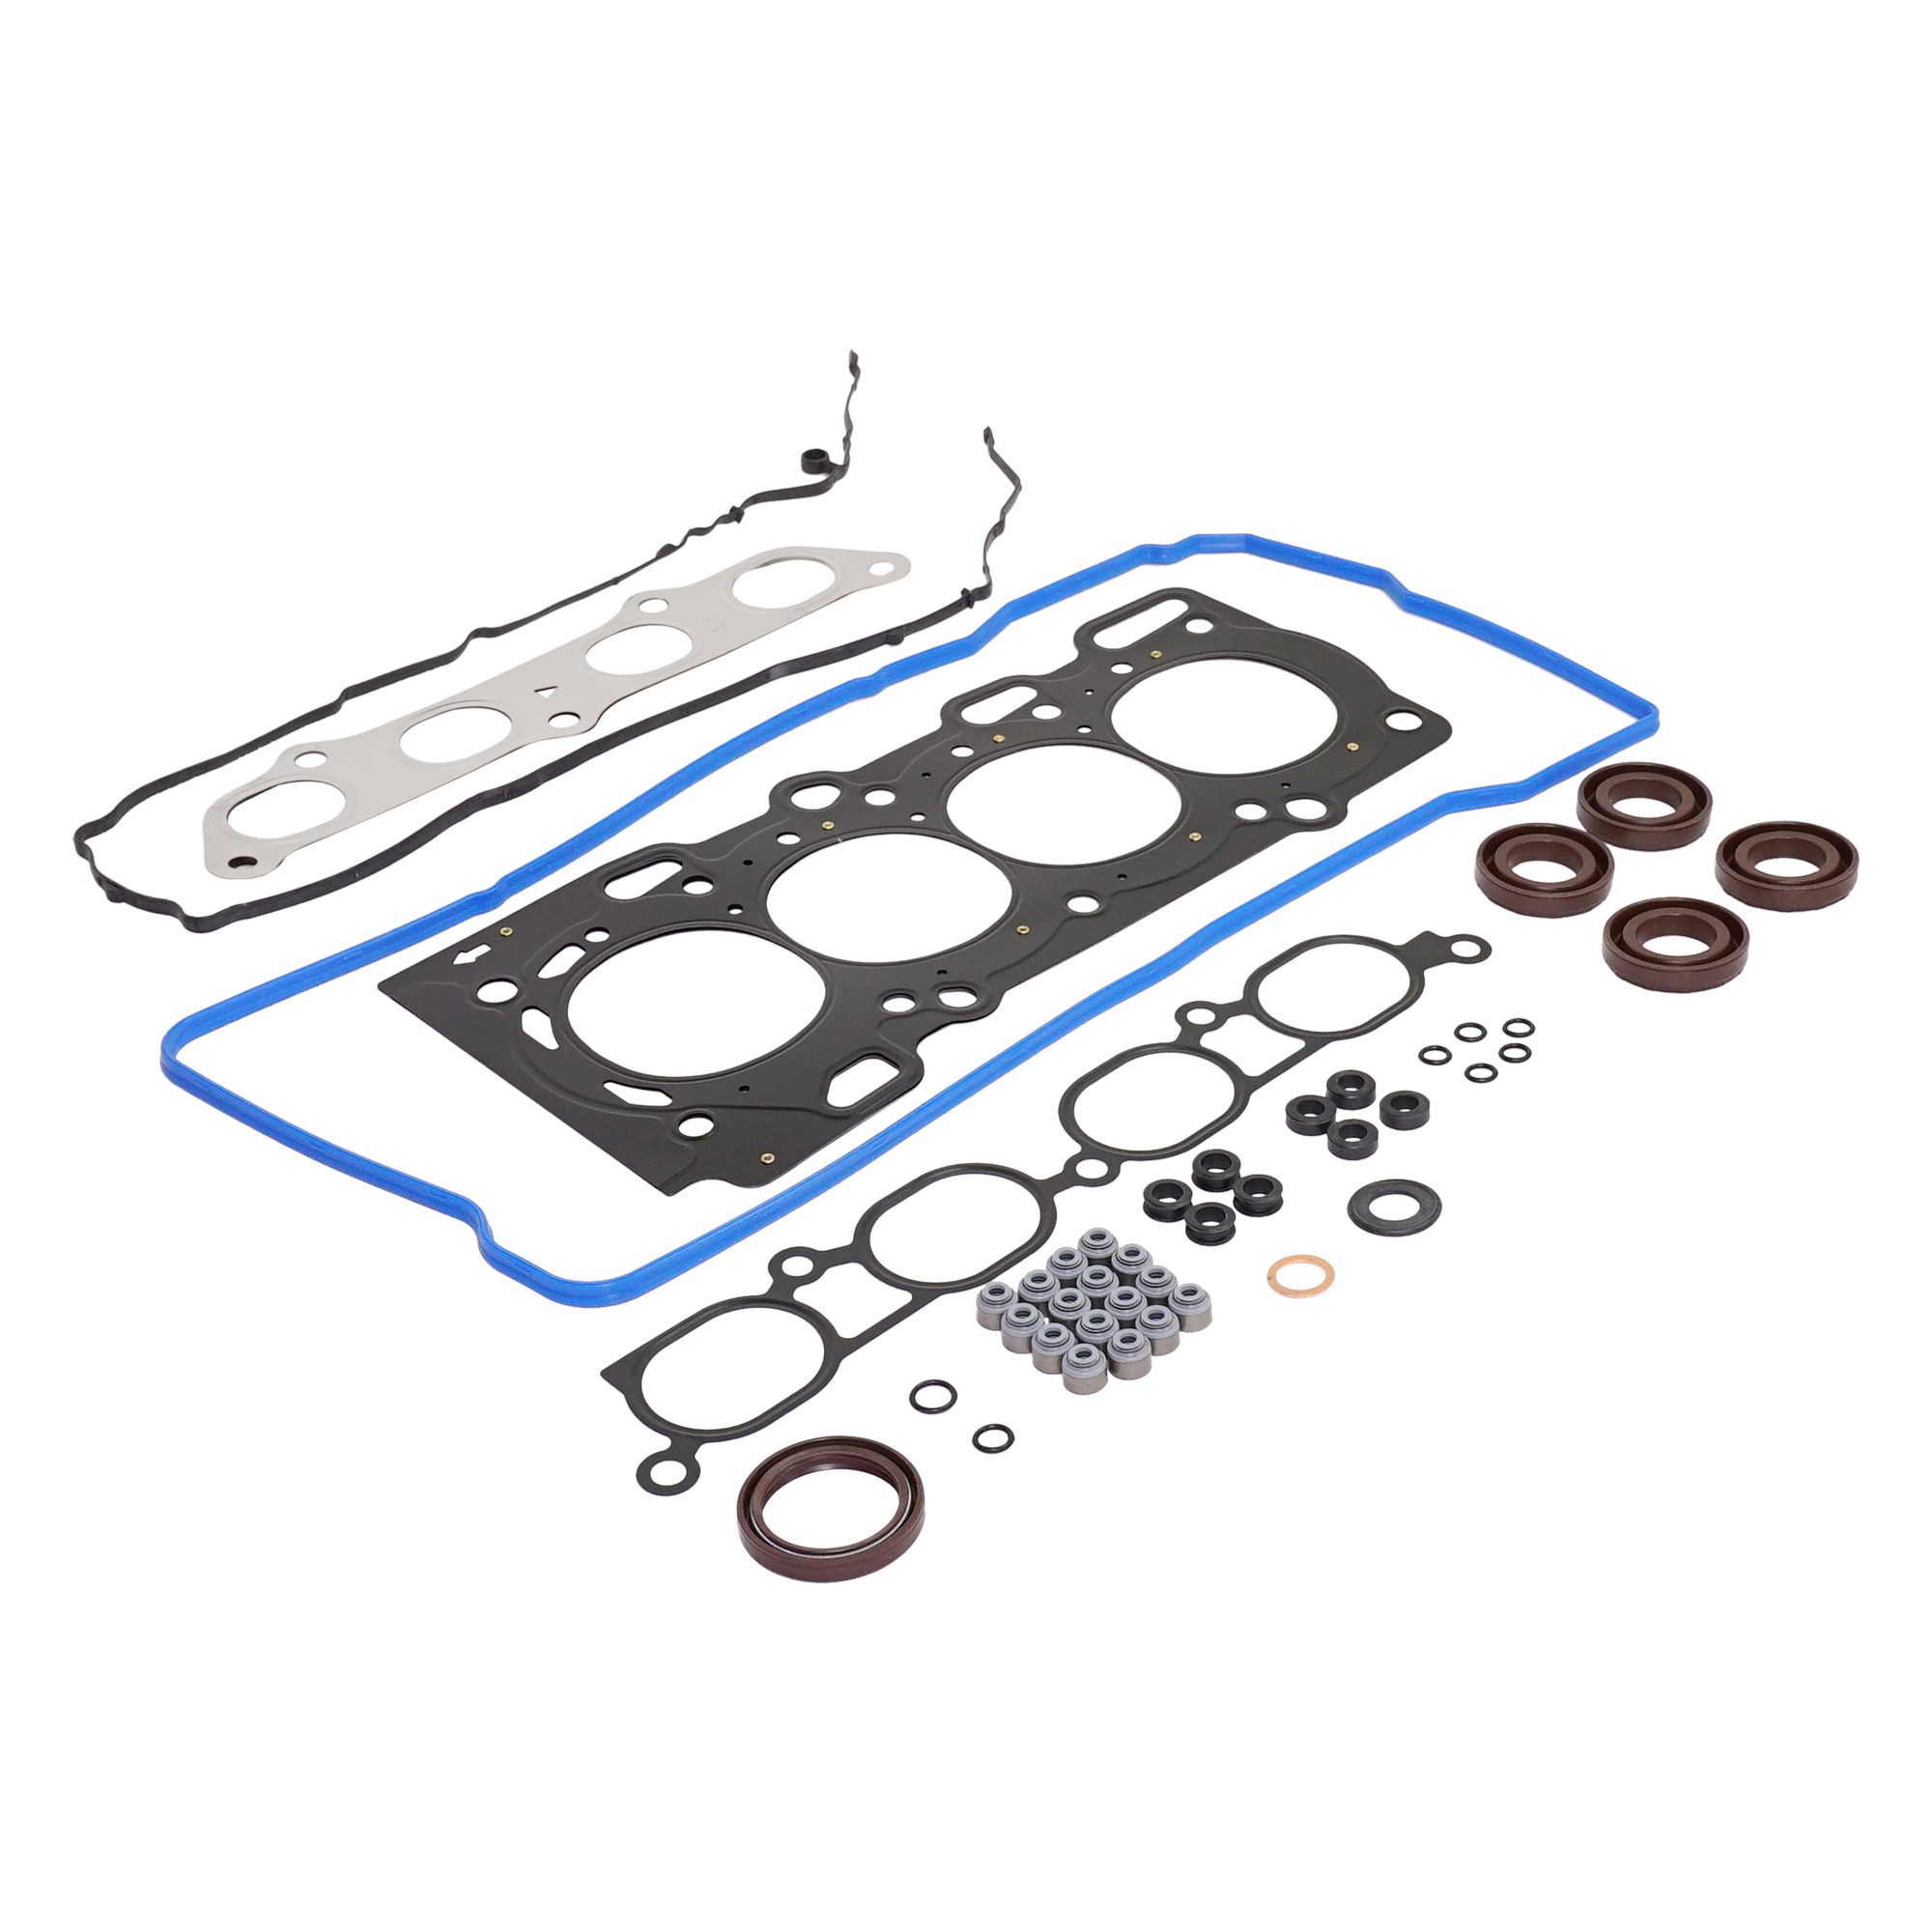 Head Gasket Set Compatible with 2000-2003 Toyota Celica 4Cyl 1.8L 